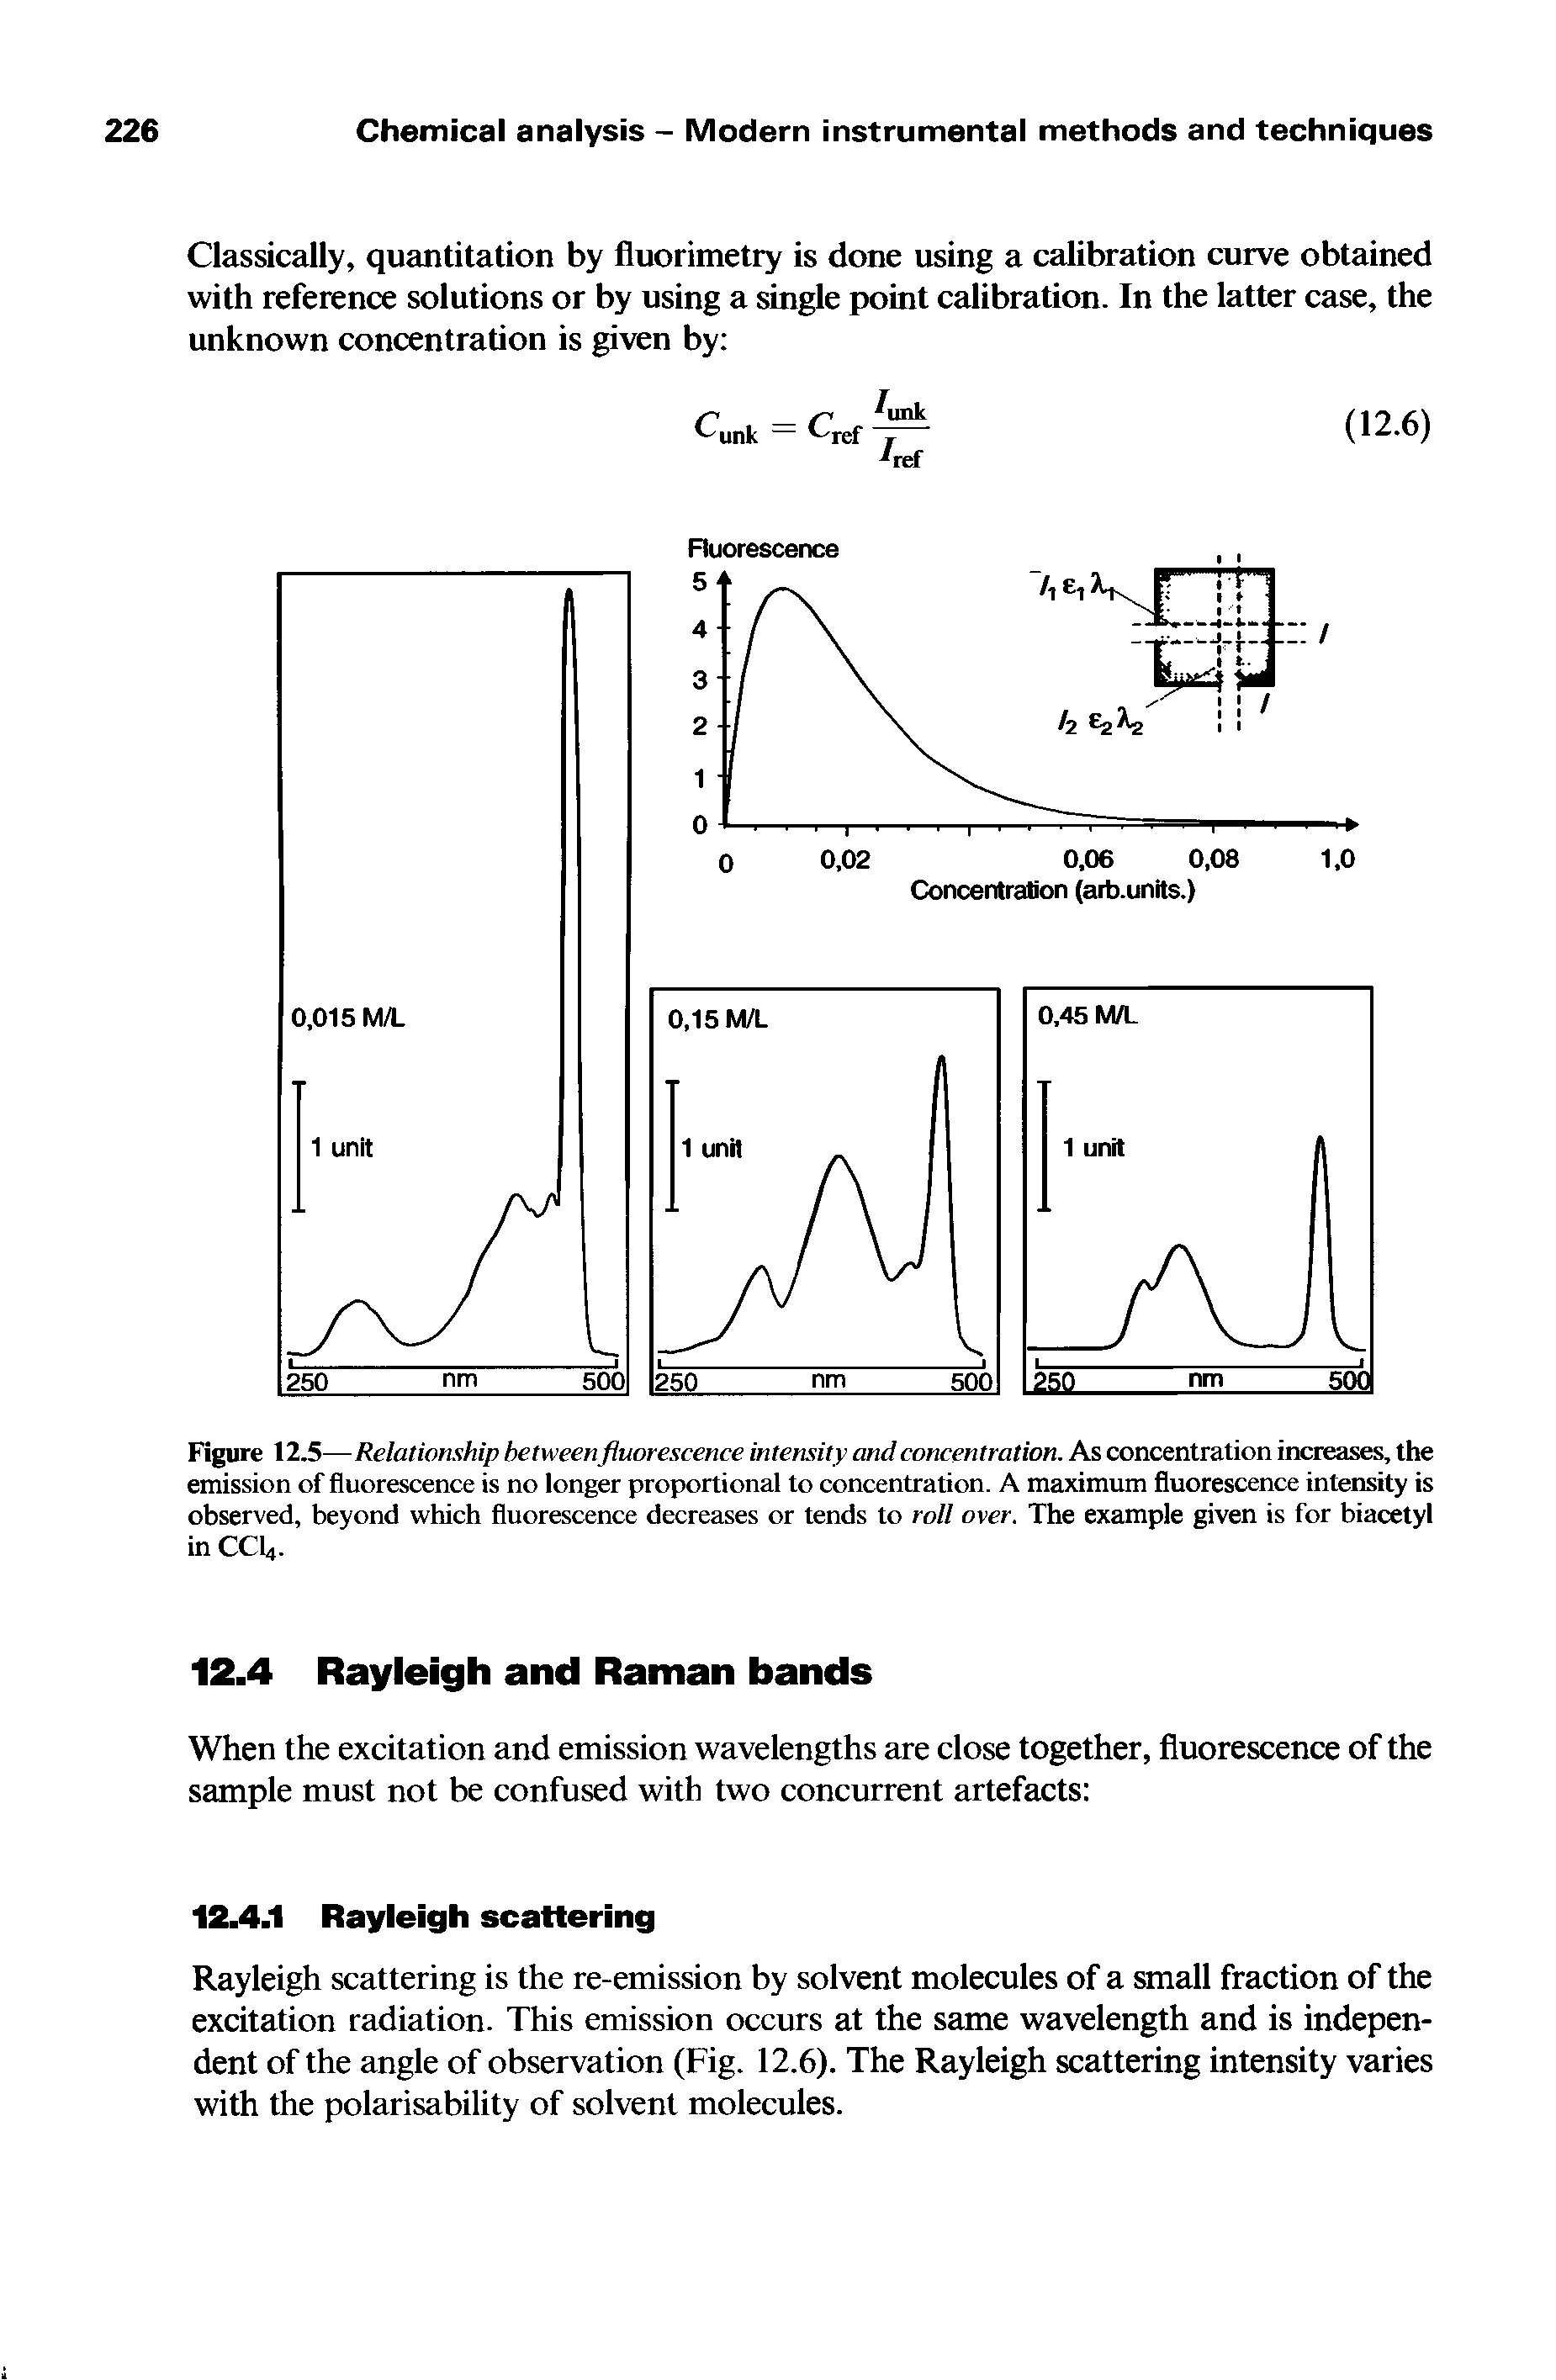 Figure 12.5—Relationship betweenfluorescence intensity and concentration. As concentration increases, the emission of fluorescence is no longer proportional to concentration. A maximum fluorescence intensity is observed, beyond which fluorescence decreases or tends to roll over. The example given is for biacetyl in CCL,.